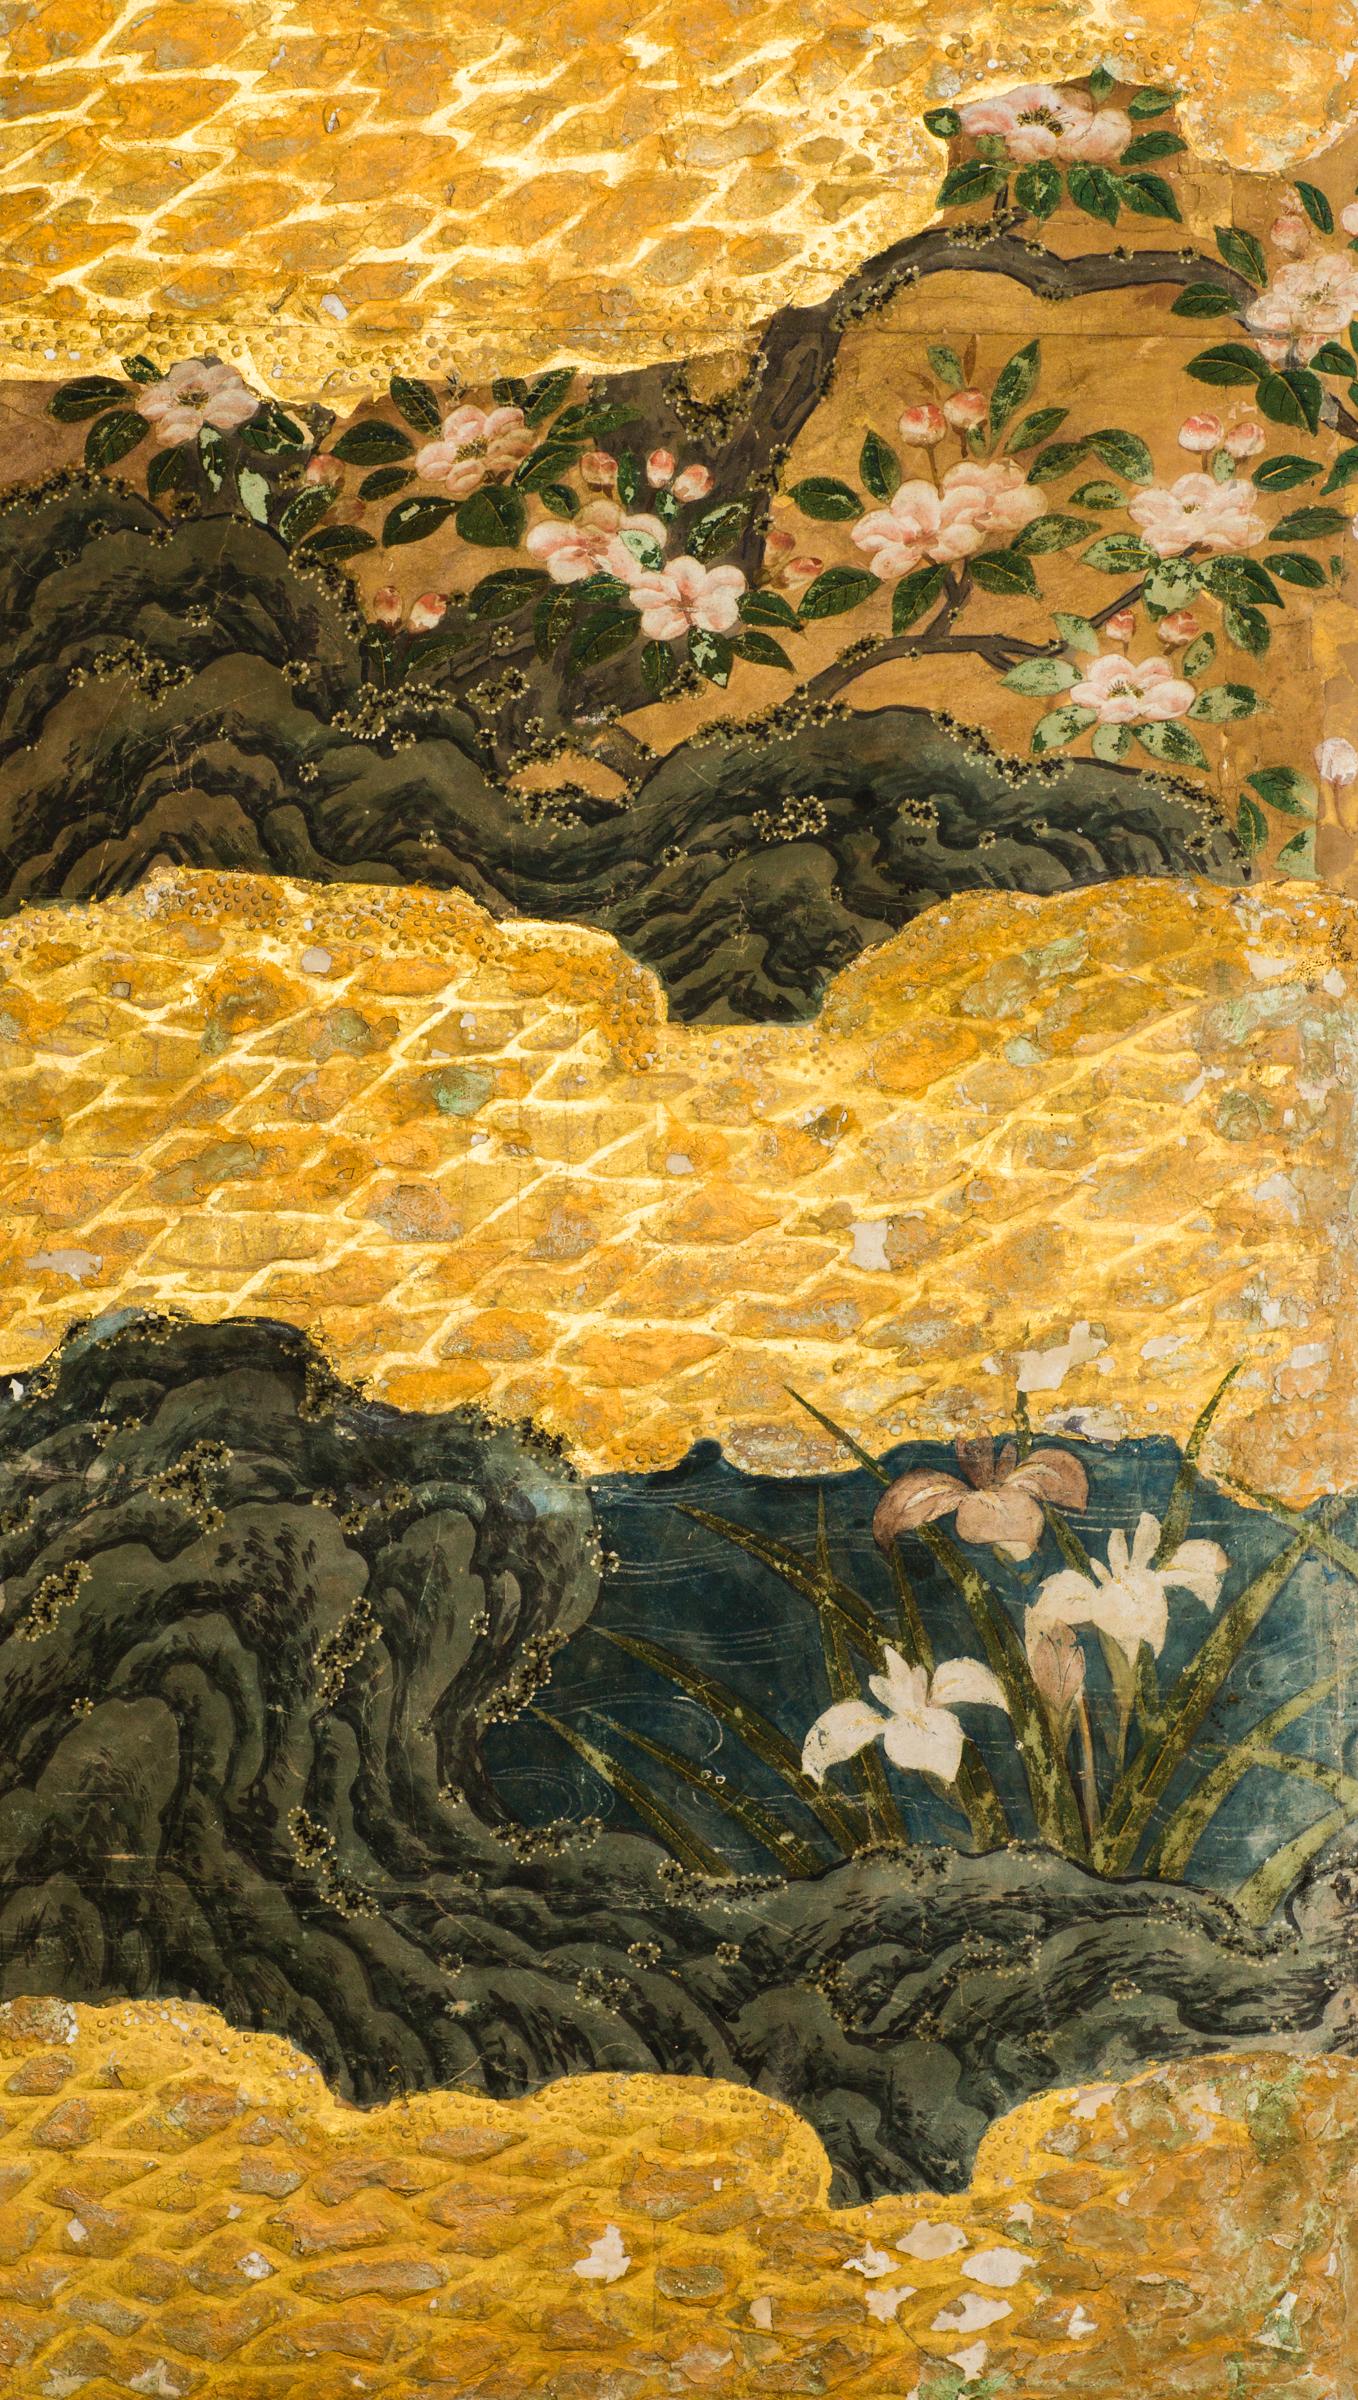 Mid-Edo period, 18th century painting with gold leaf and mineral pigments. A summer landscape depicting summer flowers and exotic birds, accented with an abstract cloud design. Mineral pigments, gofun, gold leaf on mulberry paper with a silk brocade